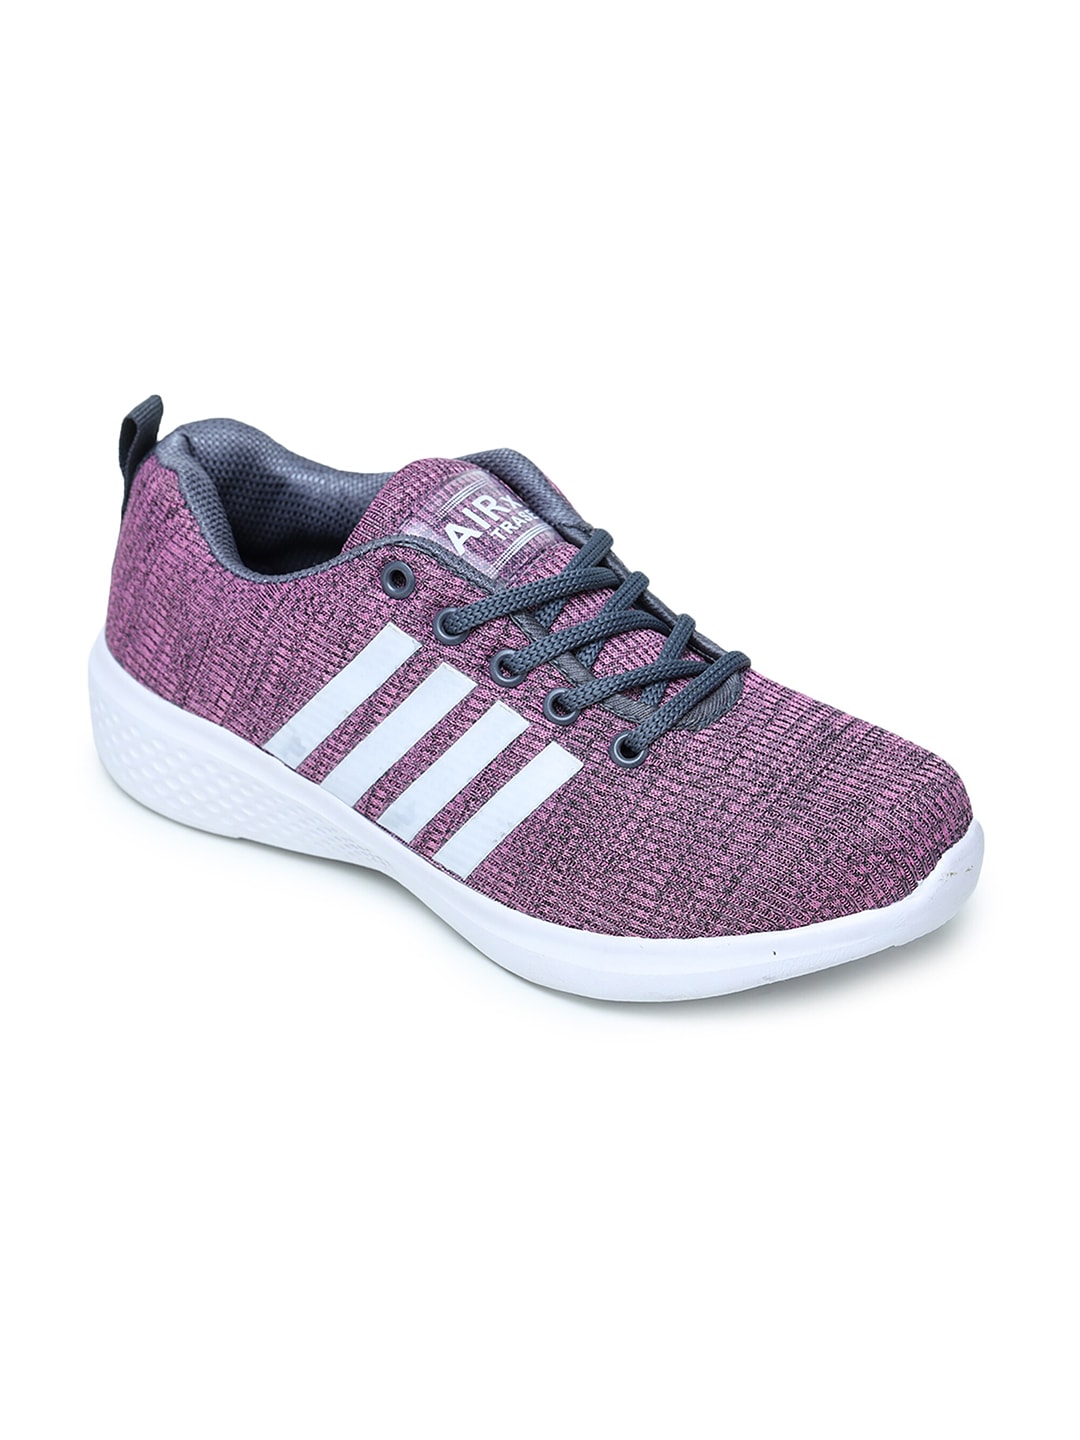 TRASE Women Purple Synthetic Lace-Up Running Shoes Price in India